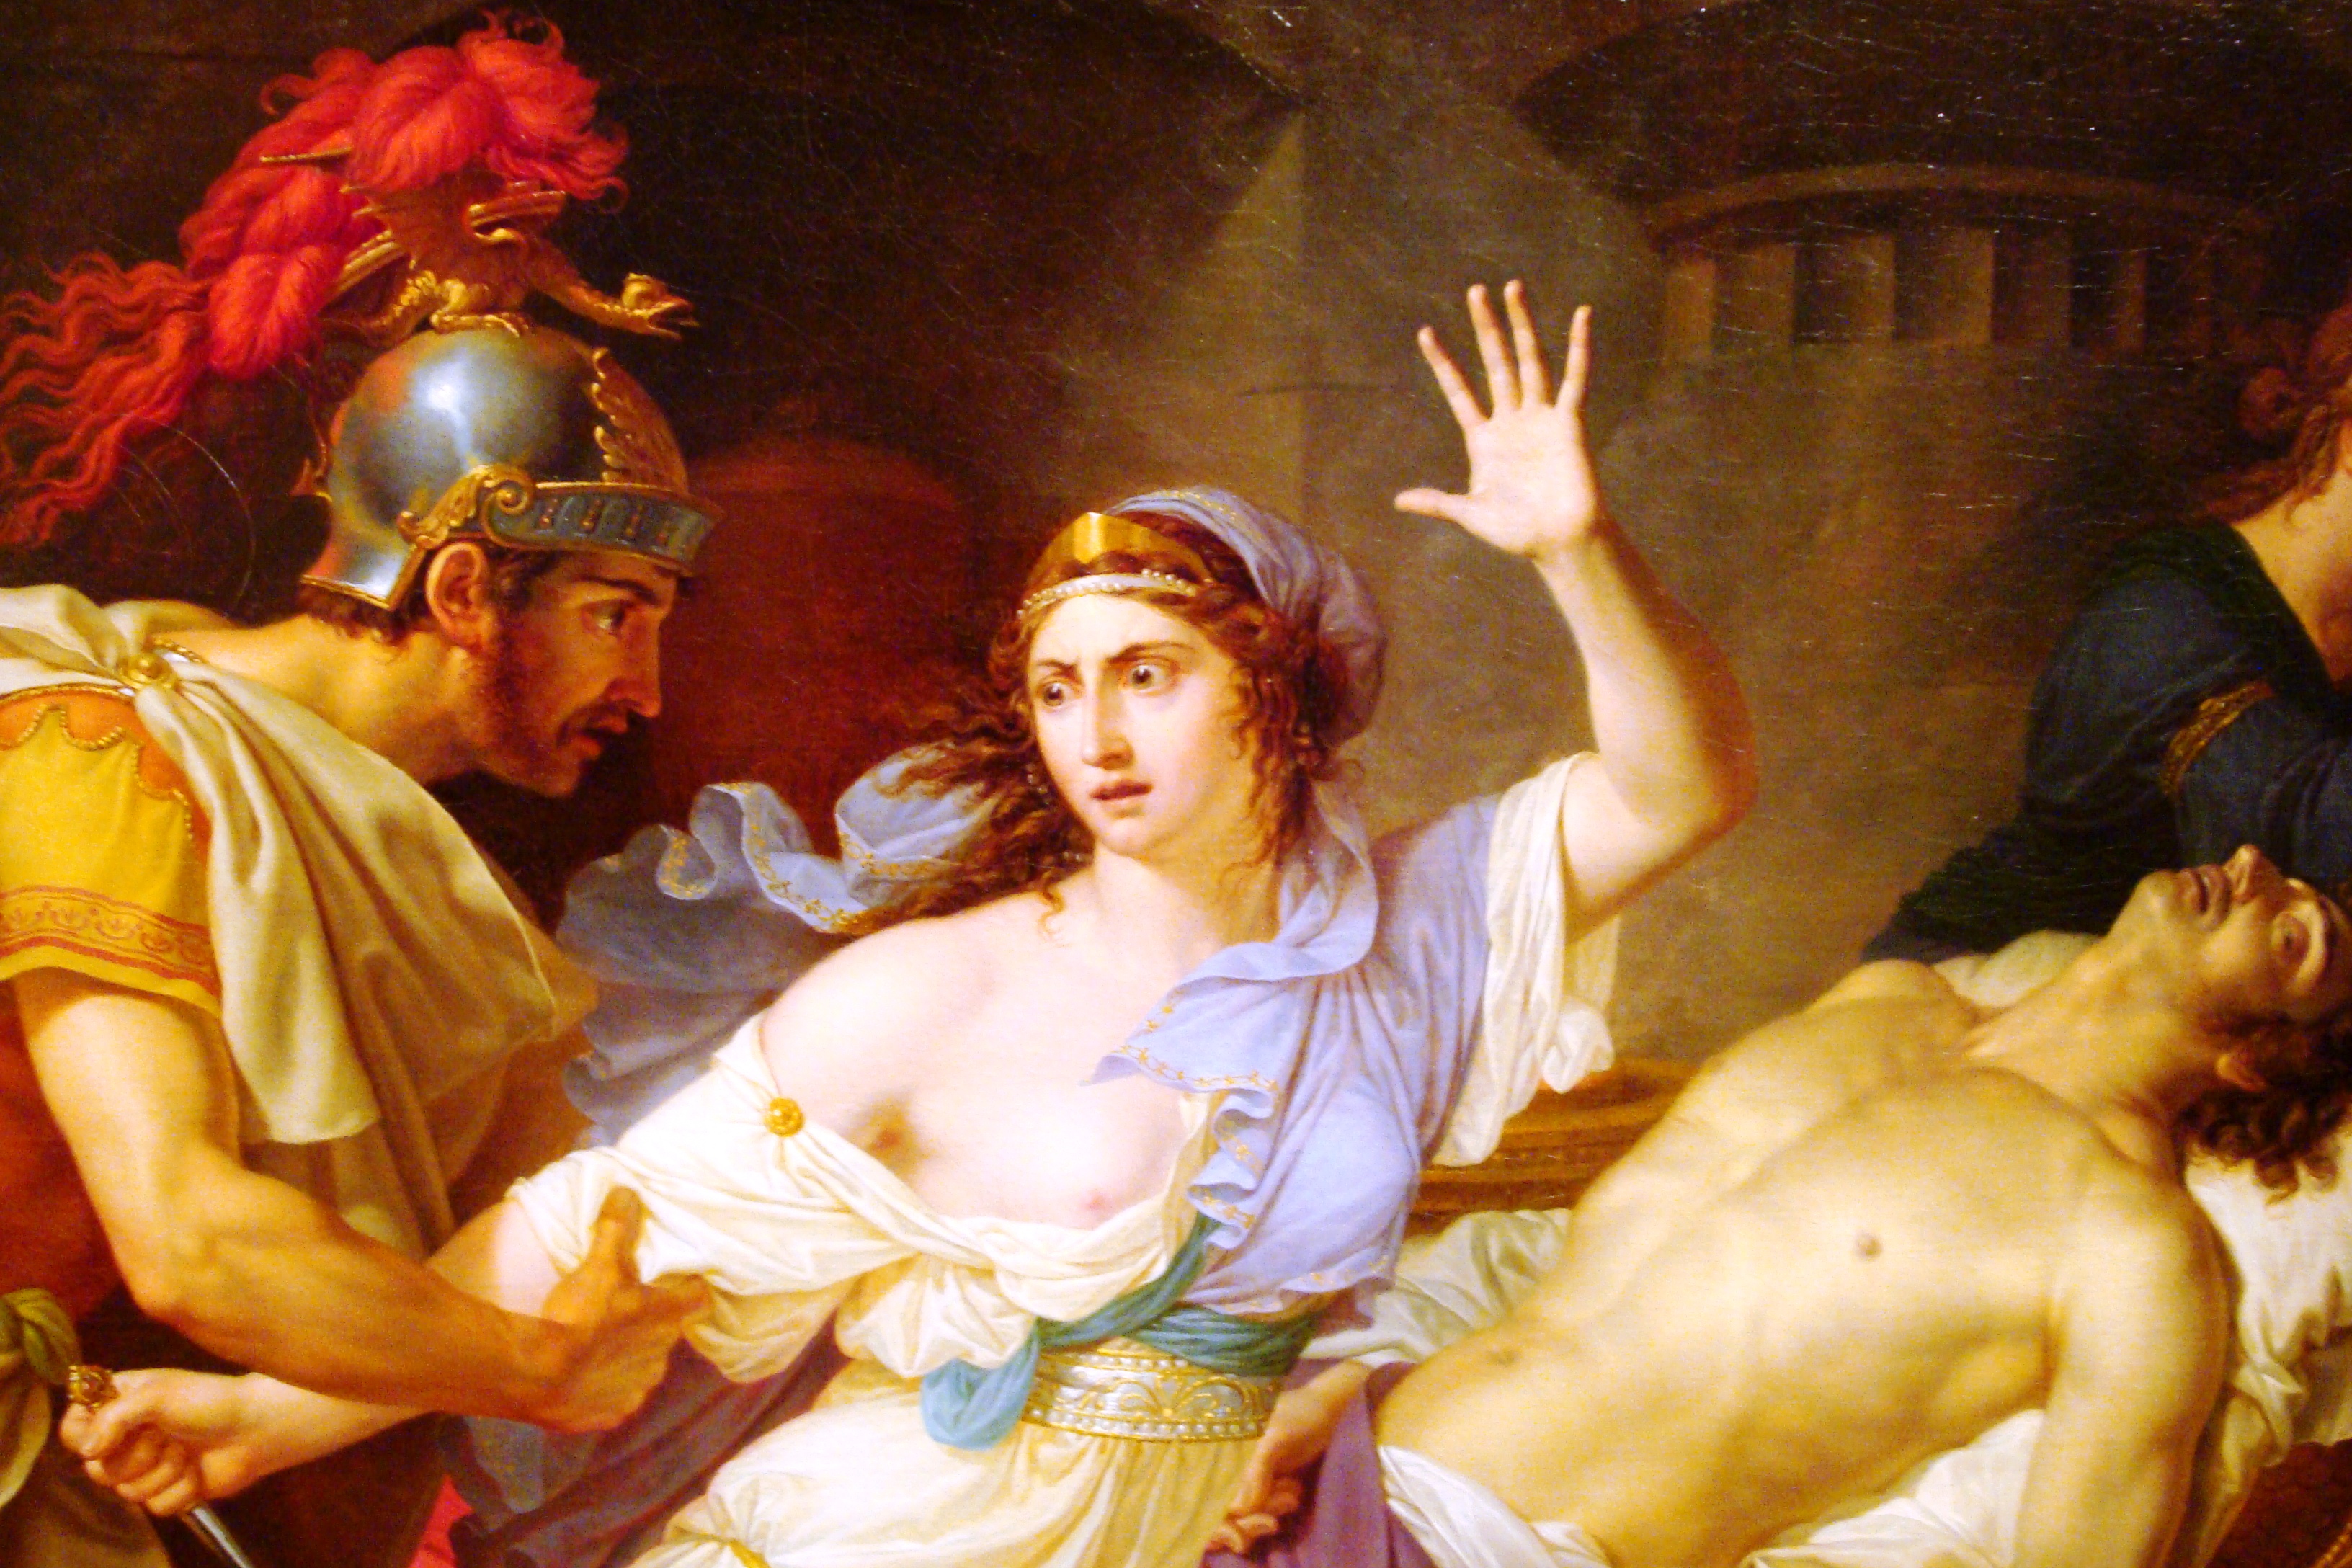 Cleopatra Captured by Roman Soldiers after the Death of Mark Antony